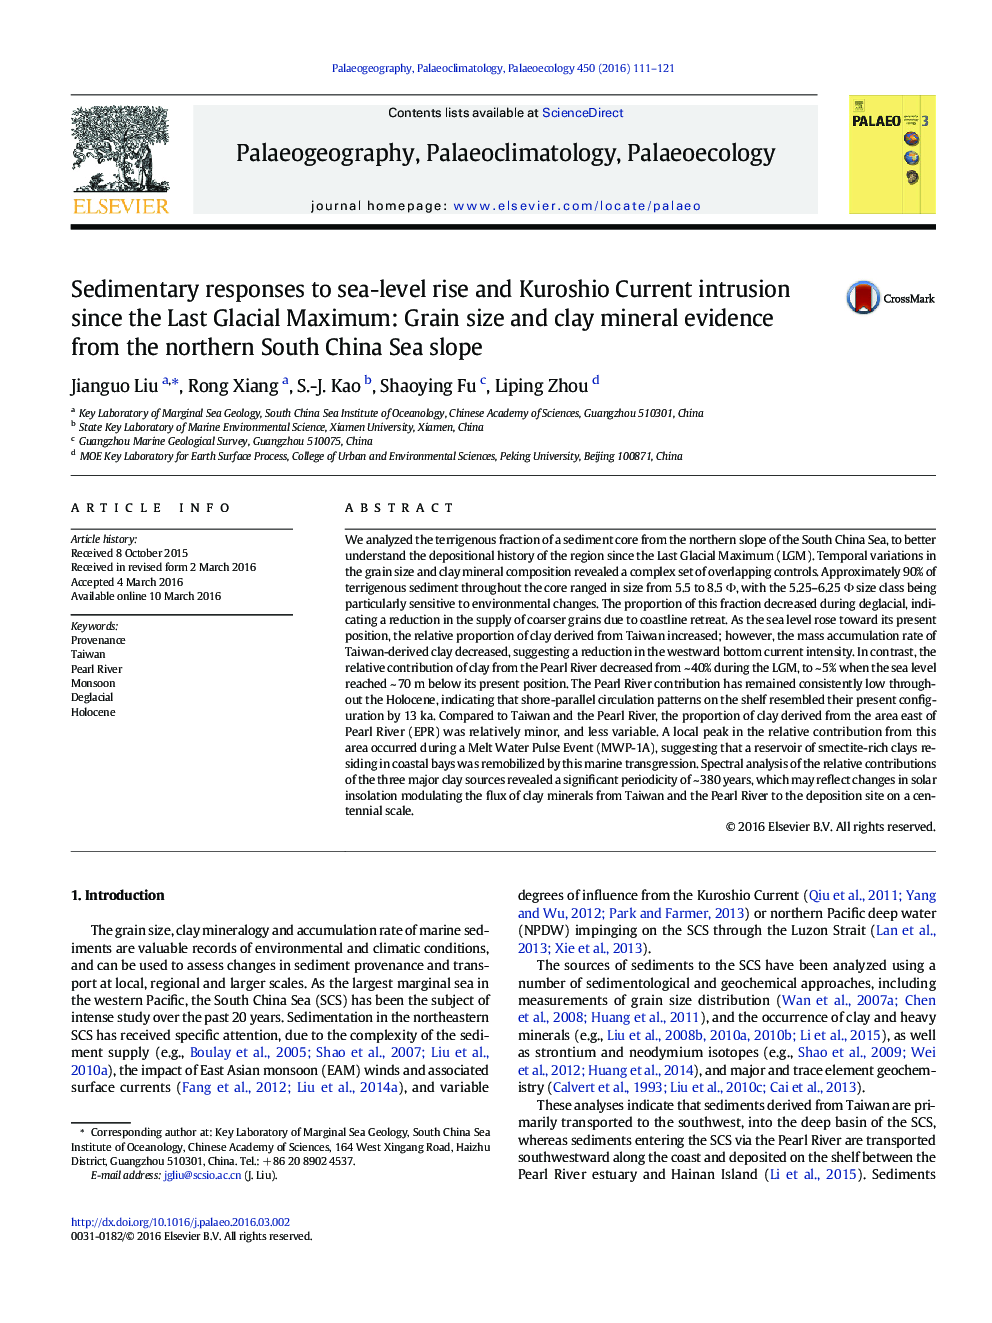 Sedimentary responses to sea-level rise and Kuroshio Current intrusion since the Last Glacial Maximum: Grain size and clay mineral evidence from the northern South China Sea slope